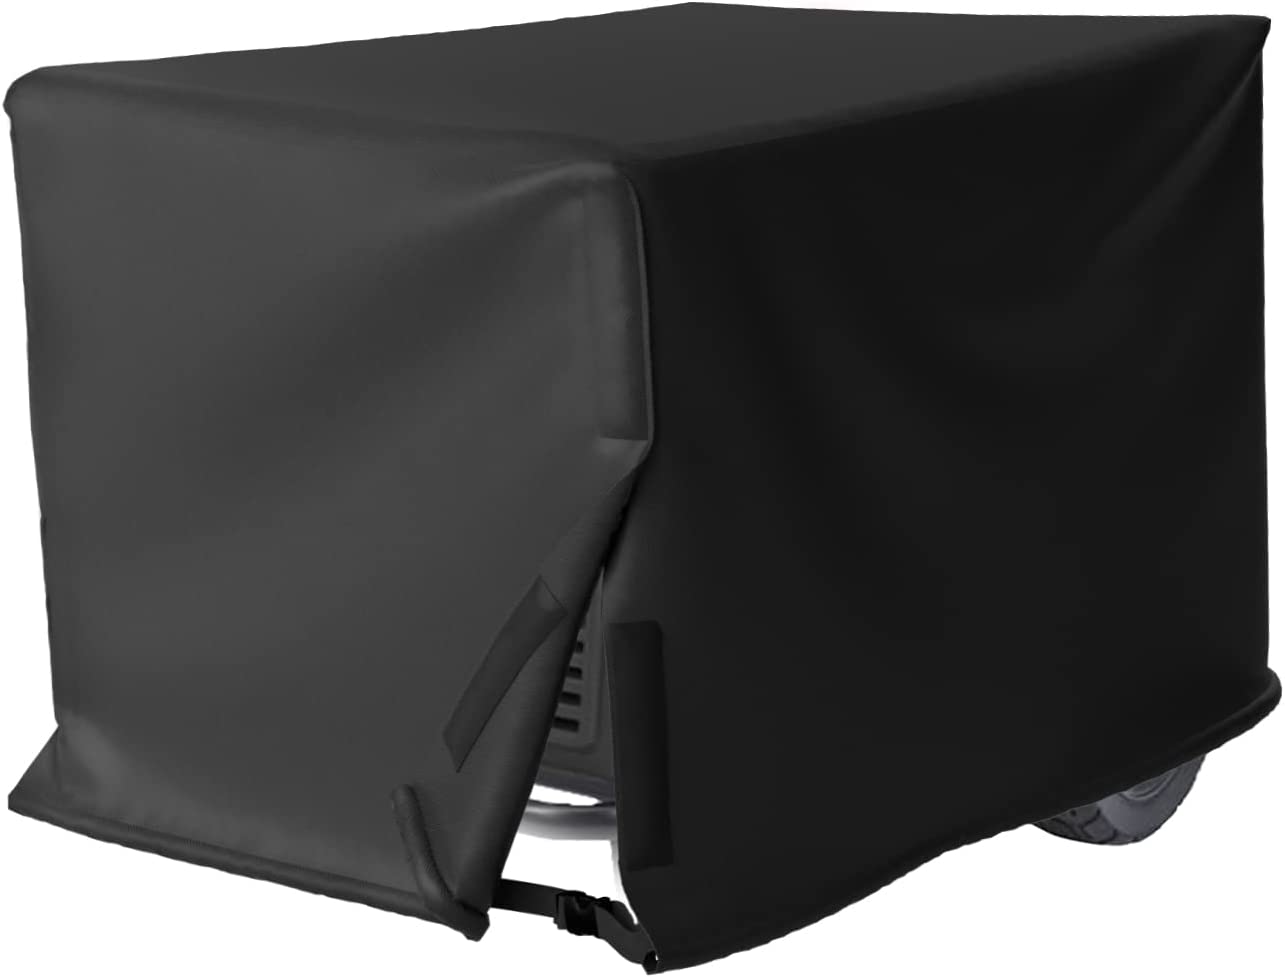 SHINESTAR Generator Cover for 3000-5000 Watt Portable Generators, for Westinghouse, Champion, WEN, DuroMax, and More, Heavy Duty Waterproof 600D Polyester, 26 x 20 x 20 Inch, Black